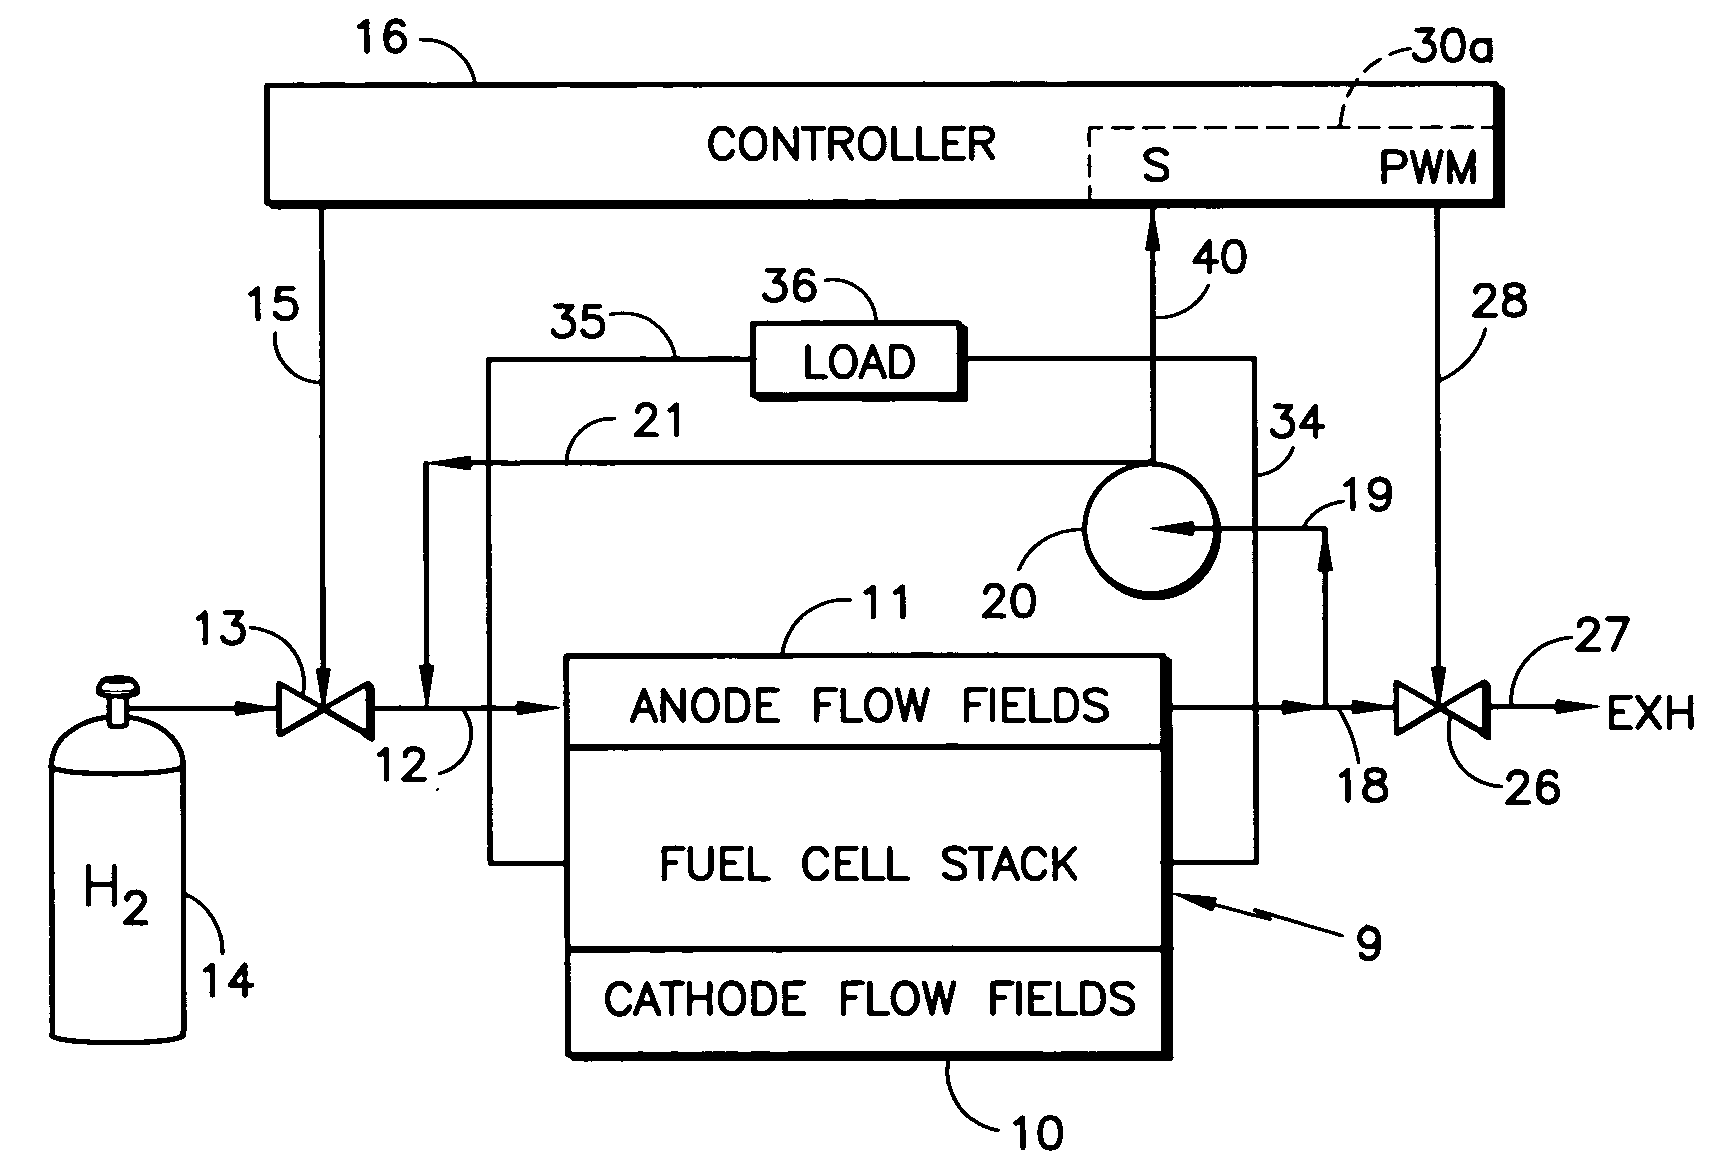 Controlling fuel cell fuel purge in response to recycle fuel blower operating conditions